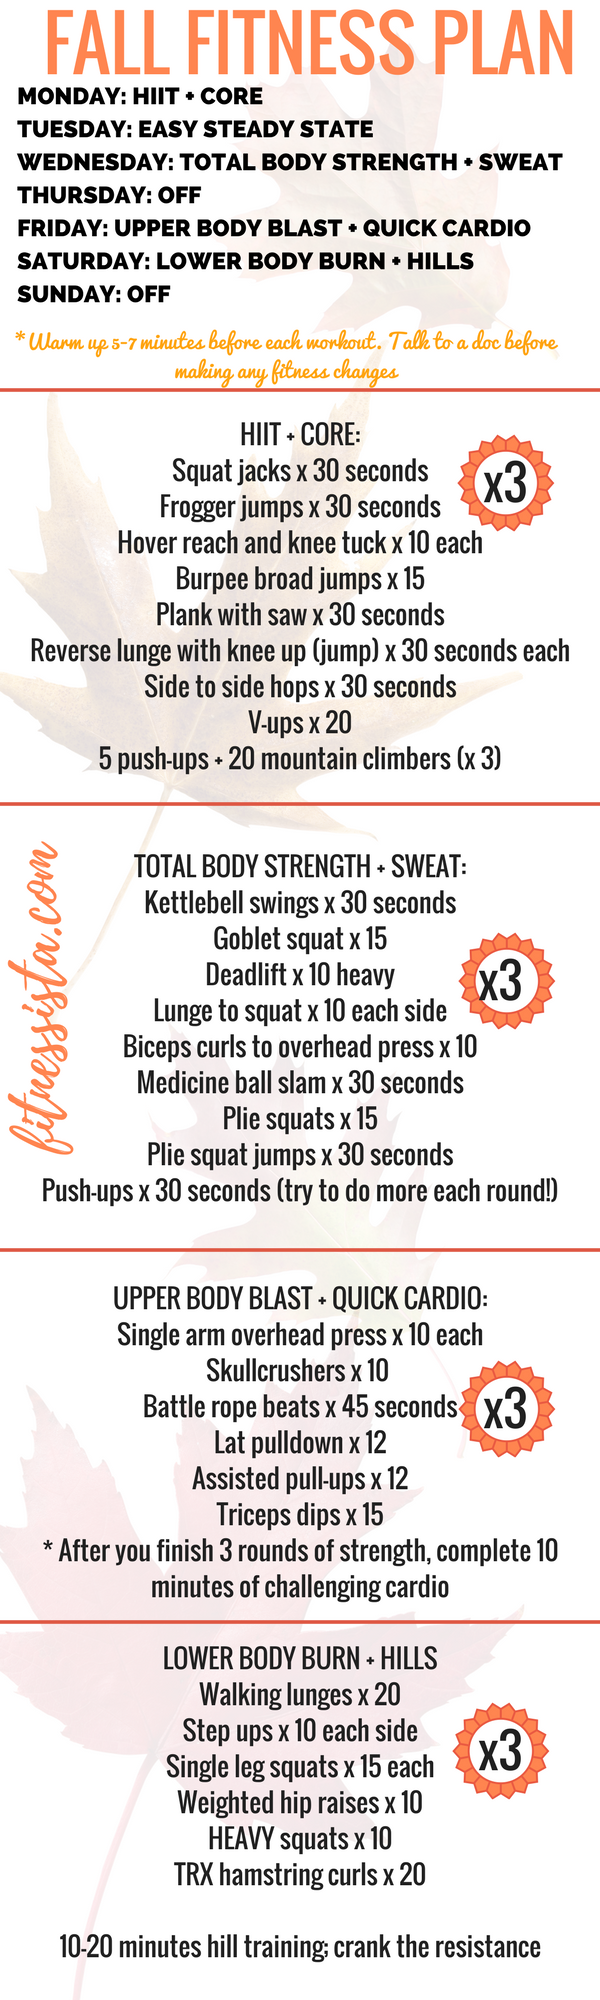 A full fall fitness plan! Perfect for the next time you don